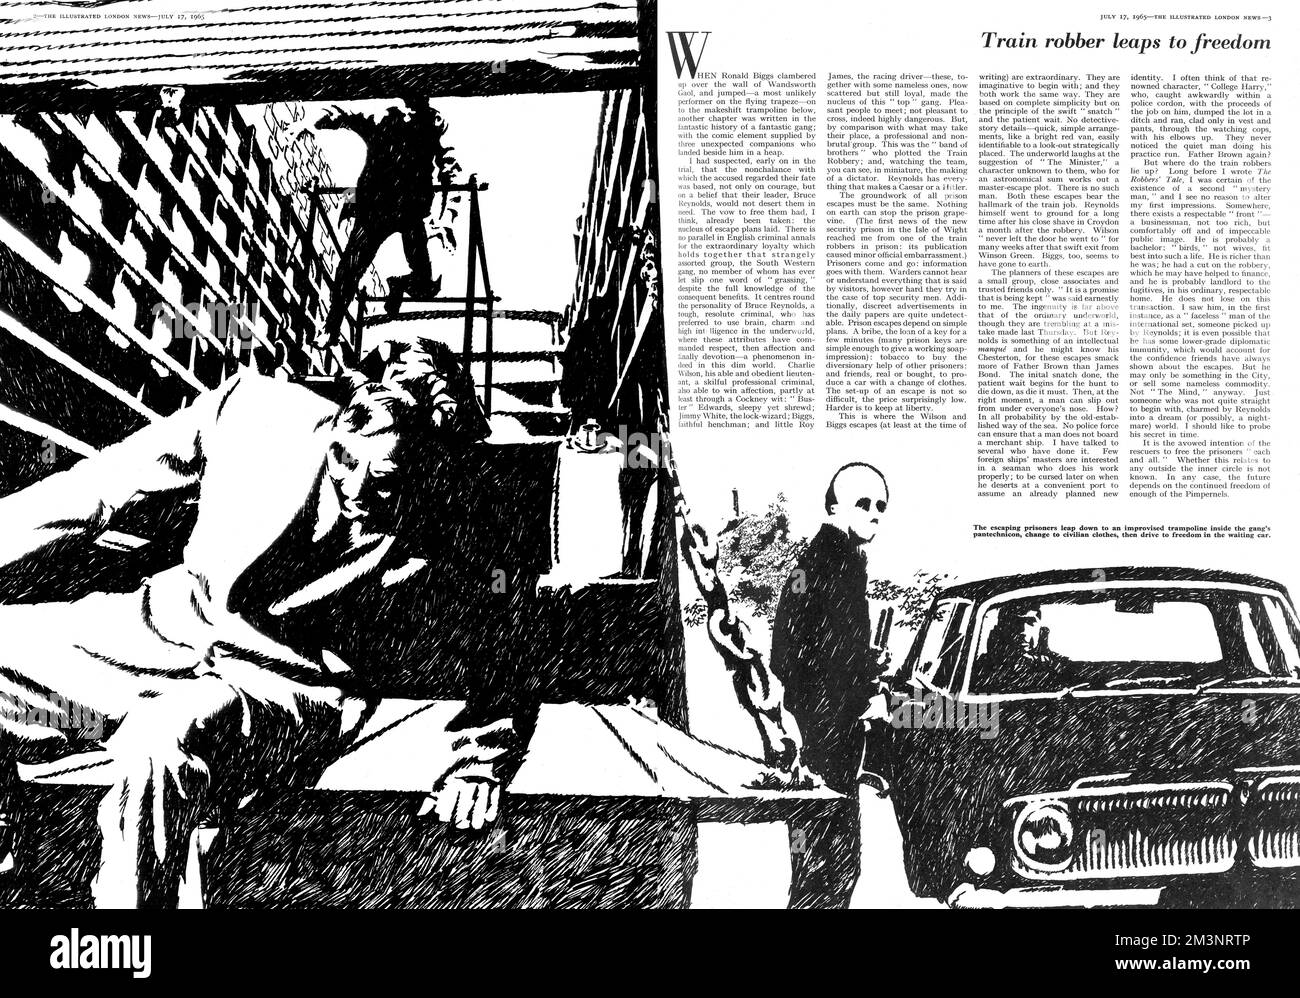 Page from The Illustrated London News, reporting on the latest episode in the Great Train Robbery saga. Ronnie Biggs and other prisoners leap to freedom over Wandsworth Gaol wall, into a waiting get away vehicle.     Date: 1965 Stock Photo